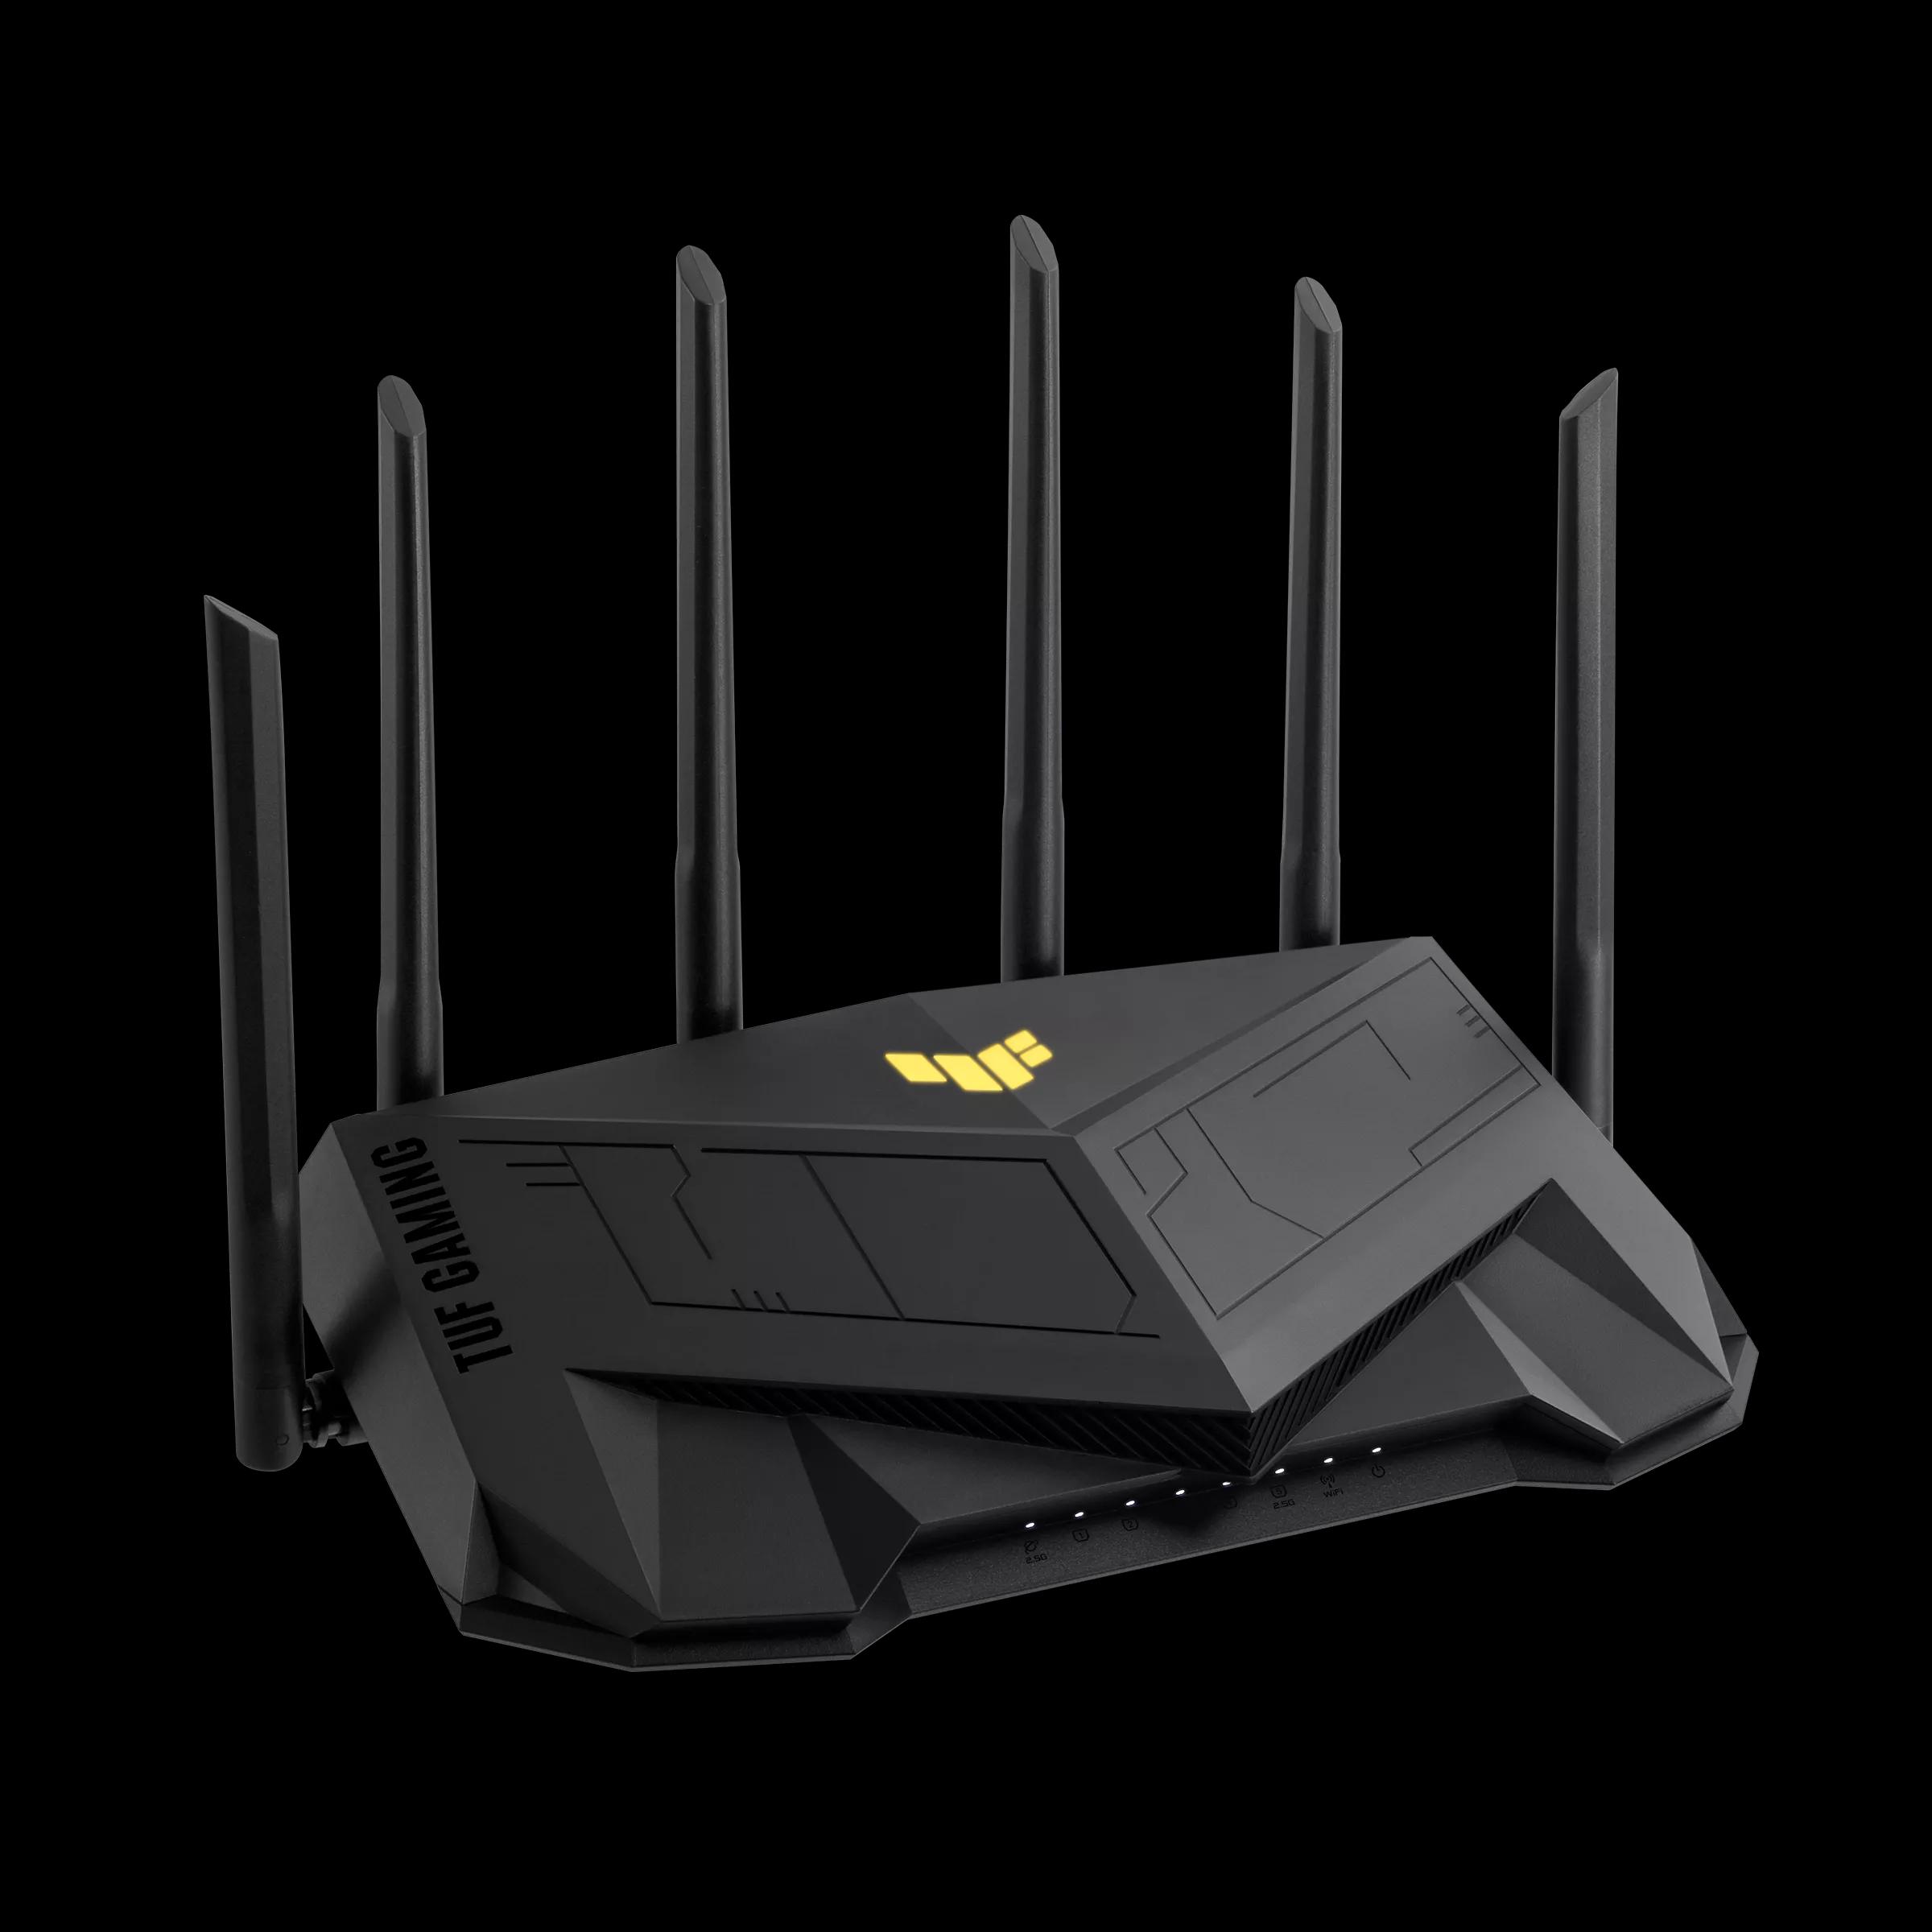 ASUS TUF GAMING AX6000 WIFI 6 ROUTER